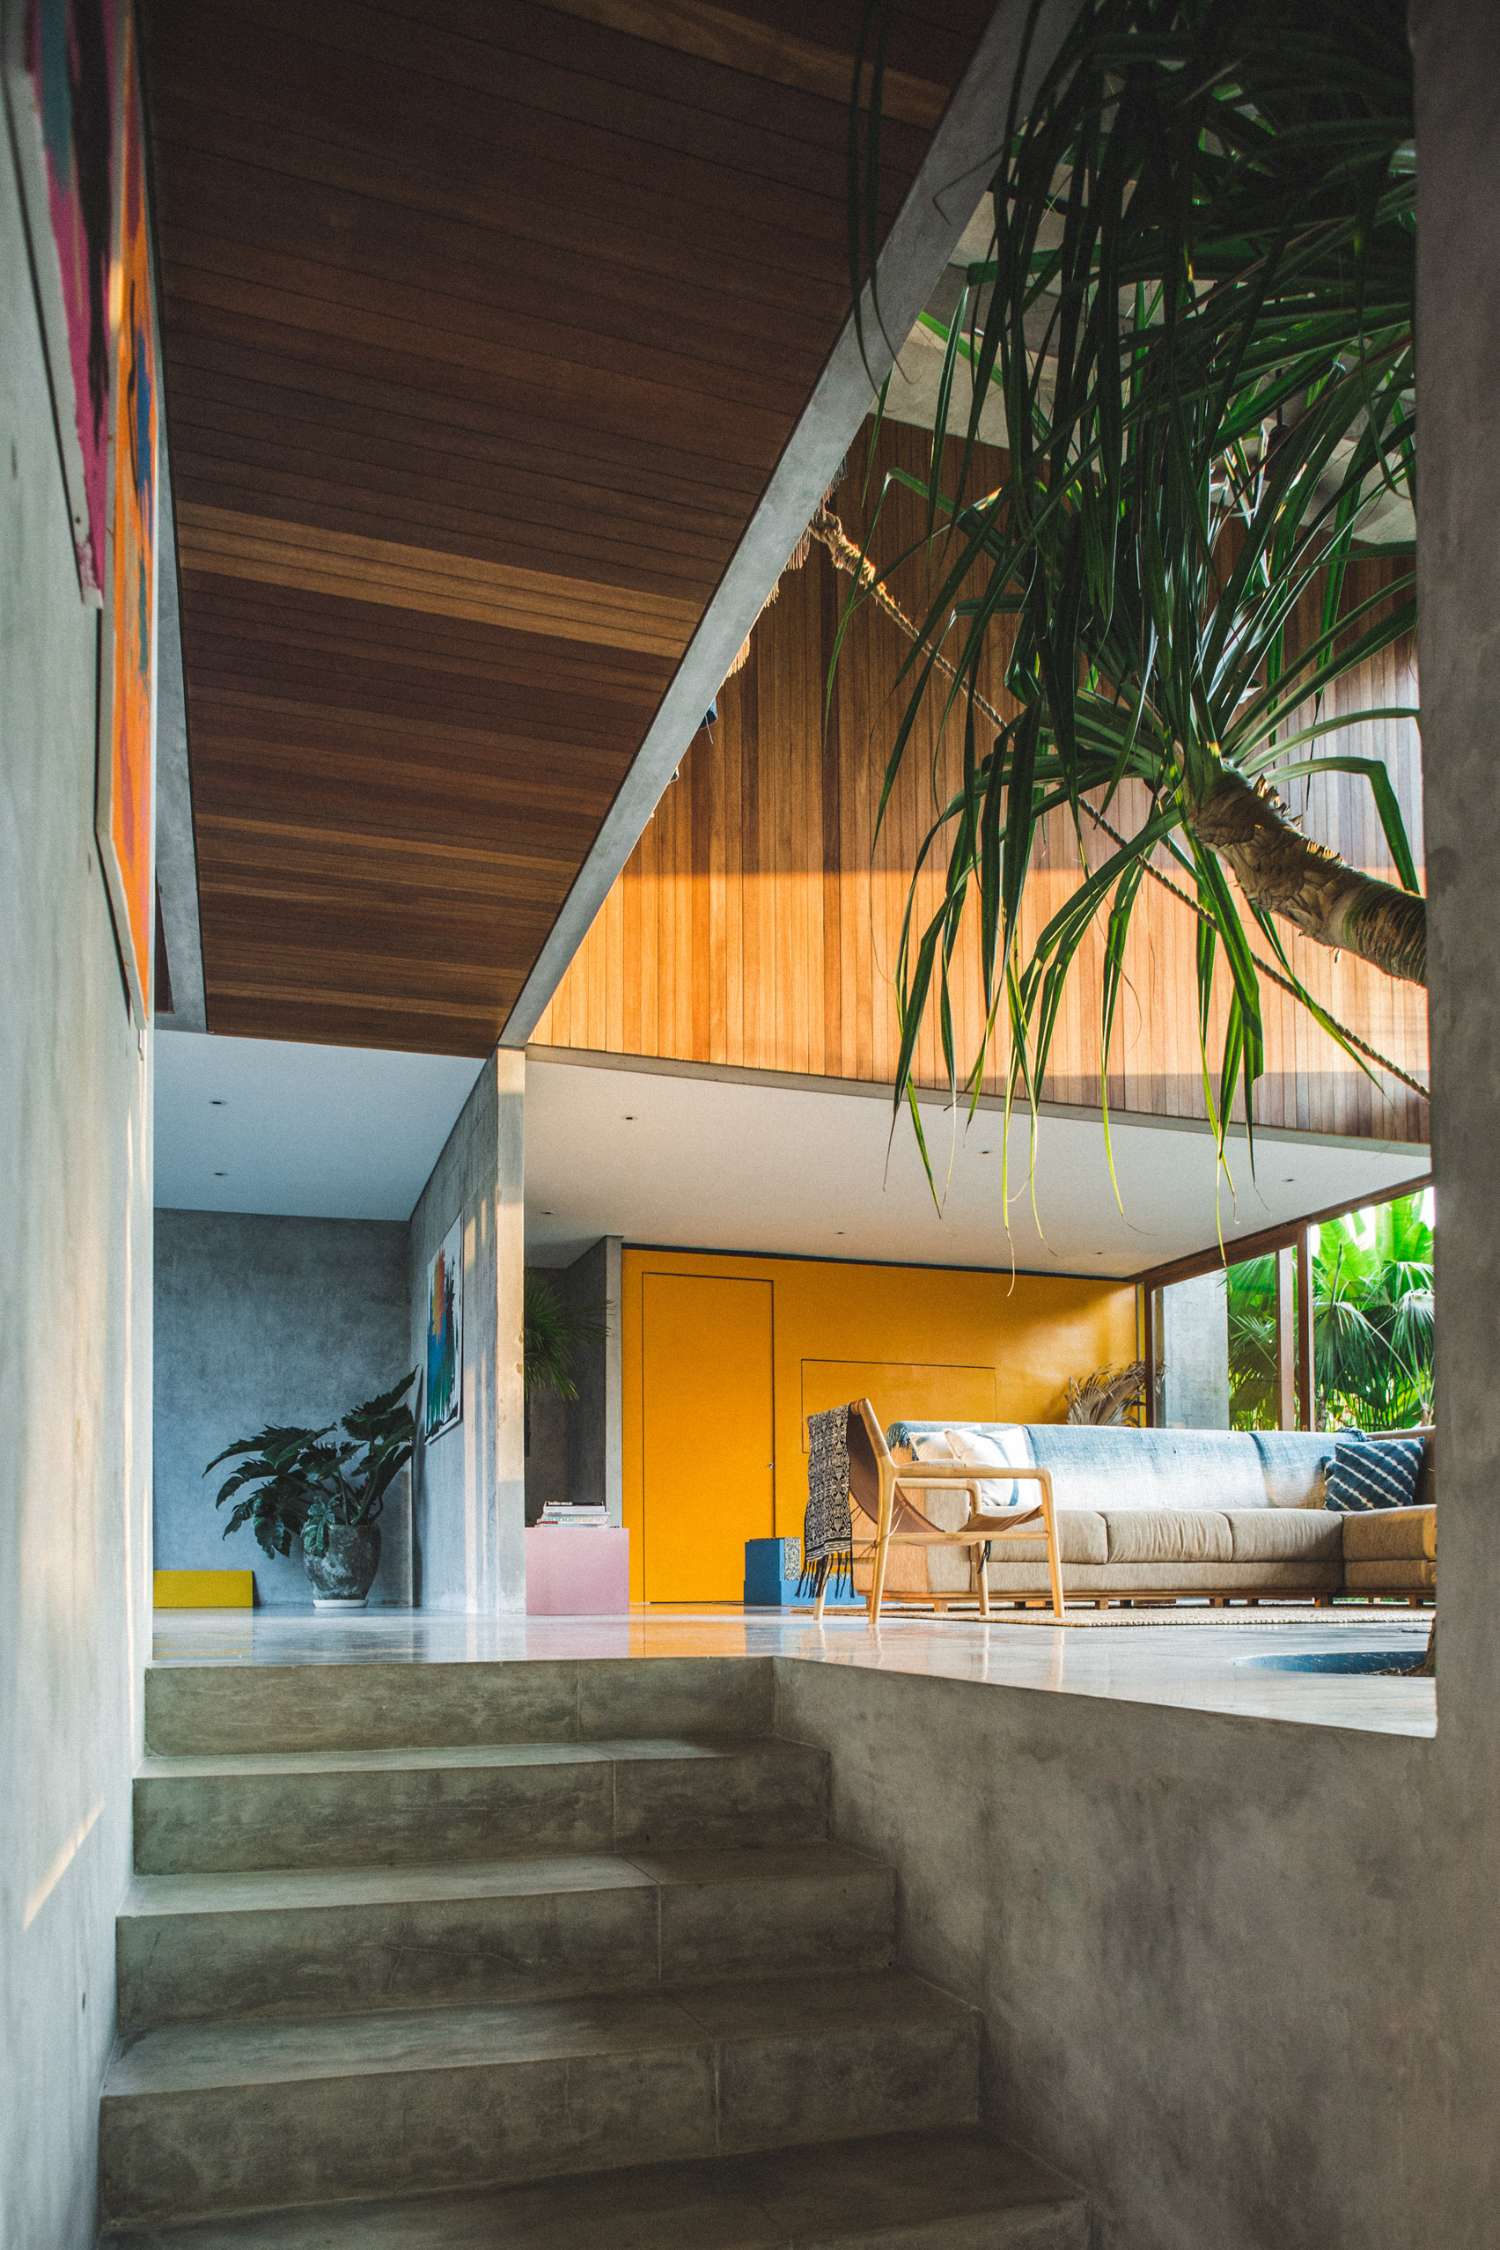 Tropical Brutalism: Concrete and Timber Home in Bali